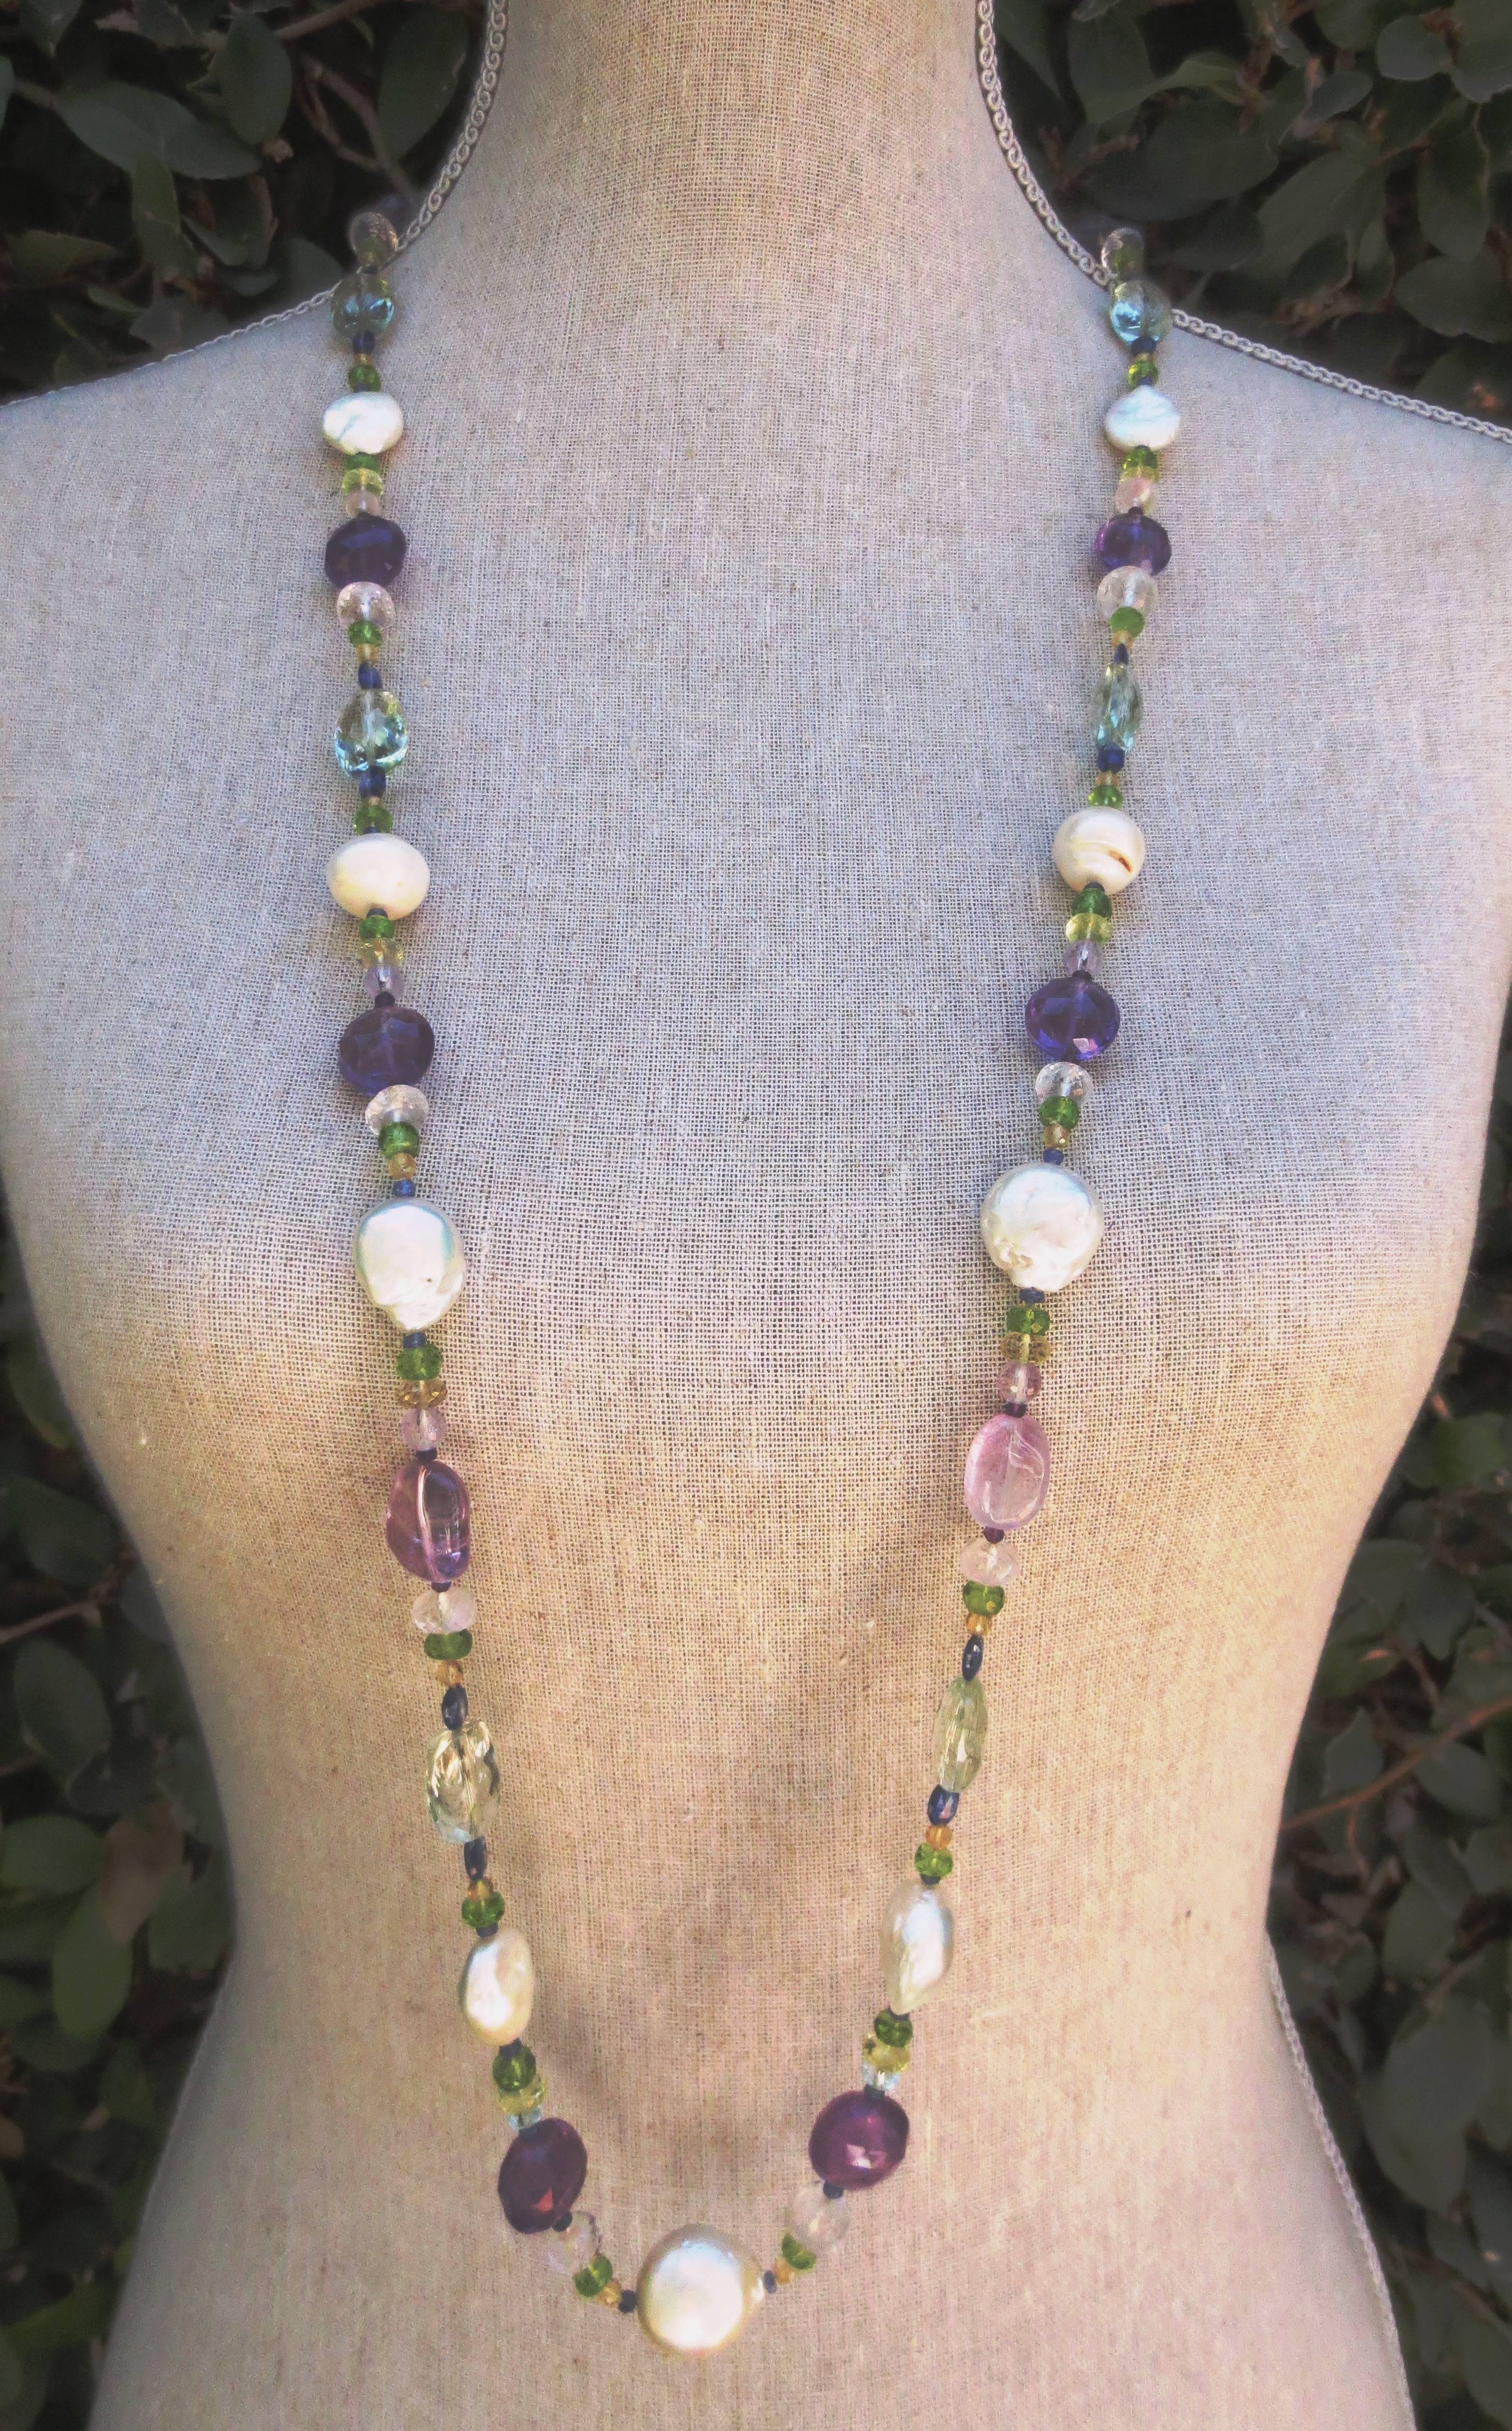 Amethyst, Citrine, Aquamarine, Peridot, Rose Quartz, Iolite, Baroque Pearls, Sapphire, and Garnet beads are combined to create a gorgeous shimmering piece. This stunning necklace can be worn long, or wrapped and is secured with a 14 K Yellow Gold